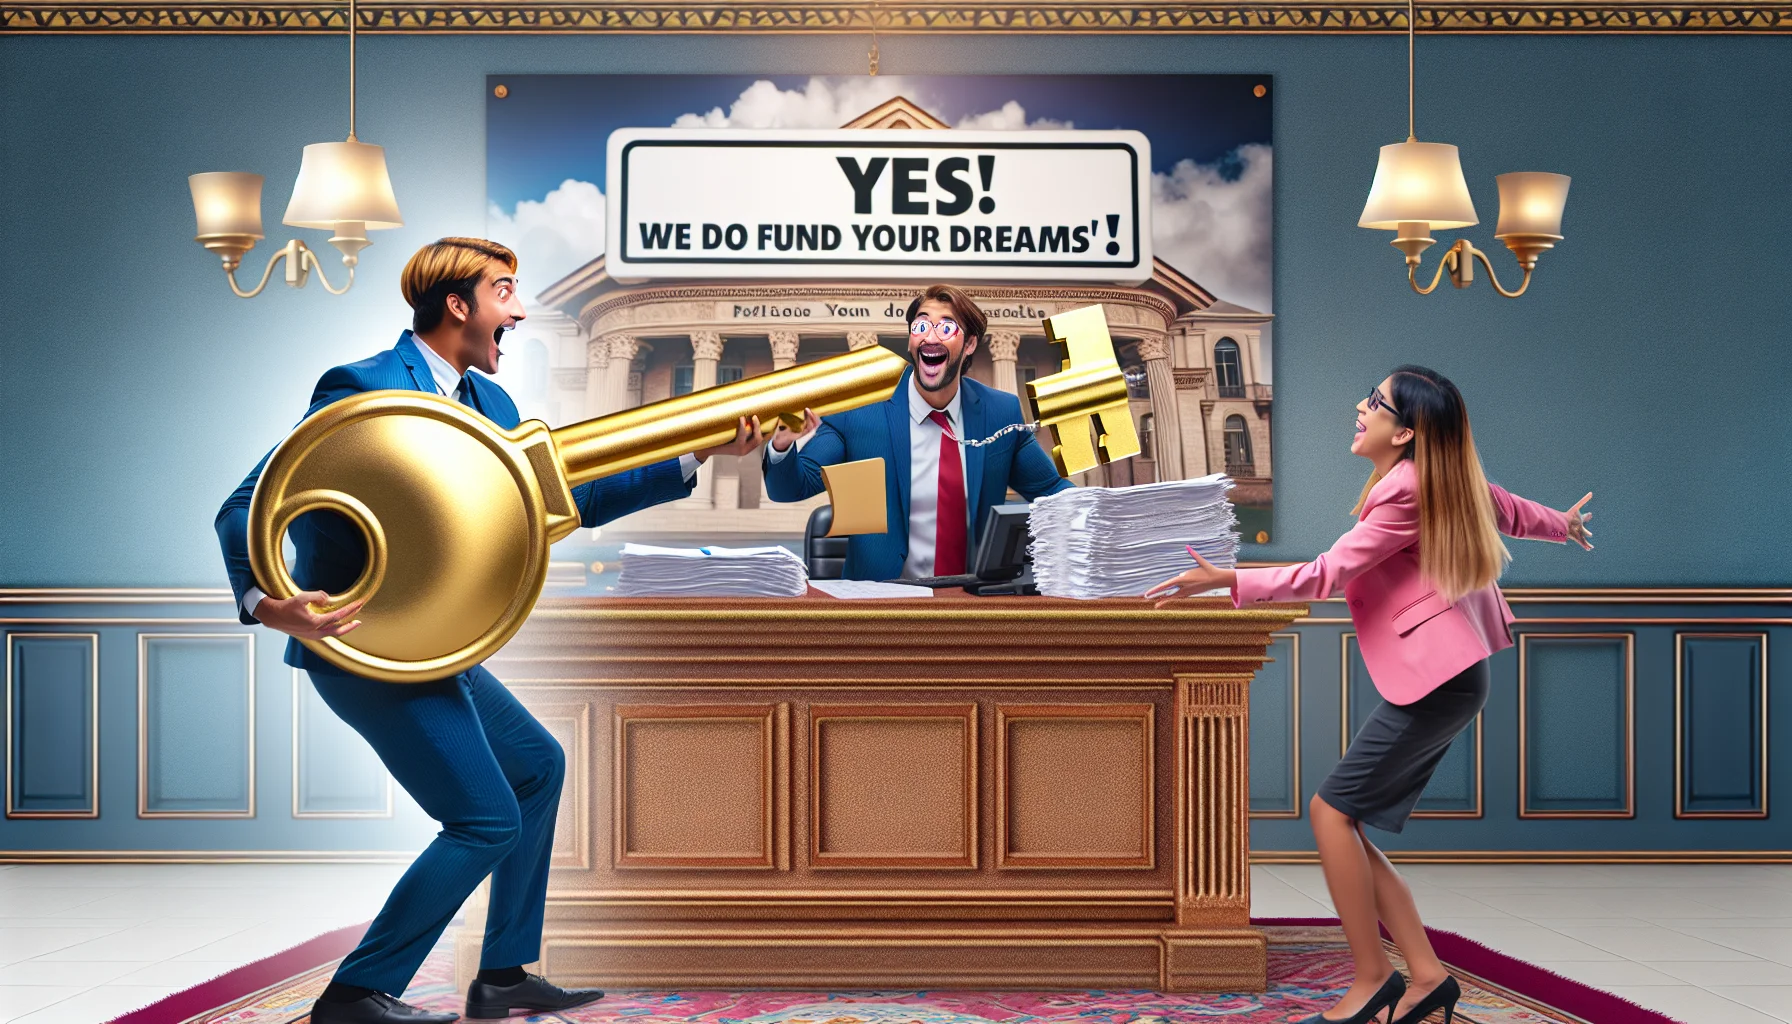 Imagine a humorous, hyper-realistic scene where an ecstatic Caucasian male bank clerk is giving a giant golden key that represents a home loan, to a delighted South Asian female client. This is set in a vibrant, well-decorated bank interior, with a large banner in the background that humorously reads 'Yes! We do fund your dreams!'. The counter is strewn with papers indicating a down payment agreement. Ensure the vibes of the image demonstrates the 'perfect' scenario in real-estate transactions.